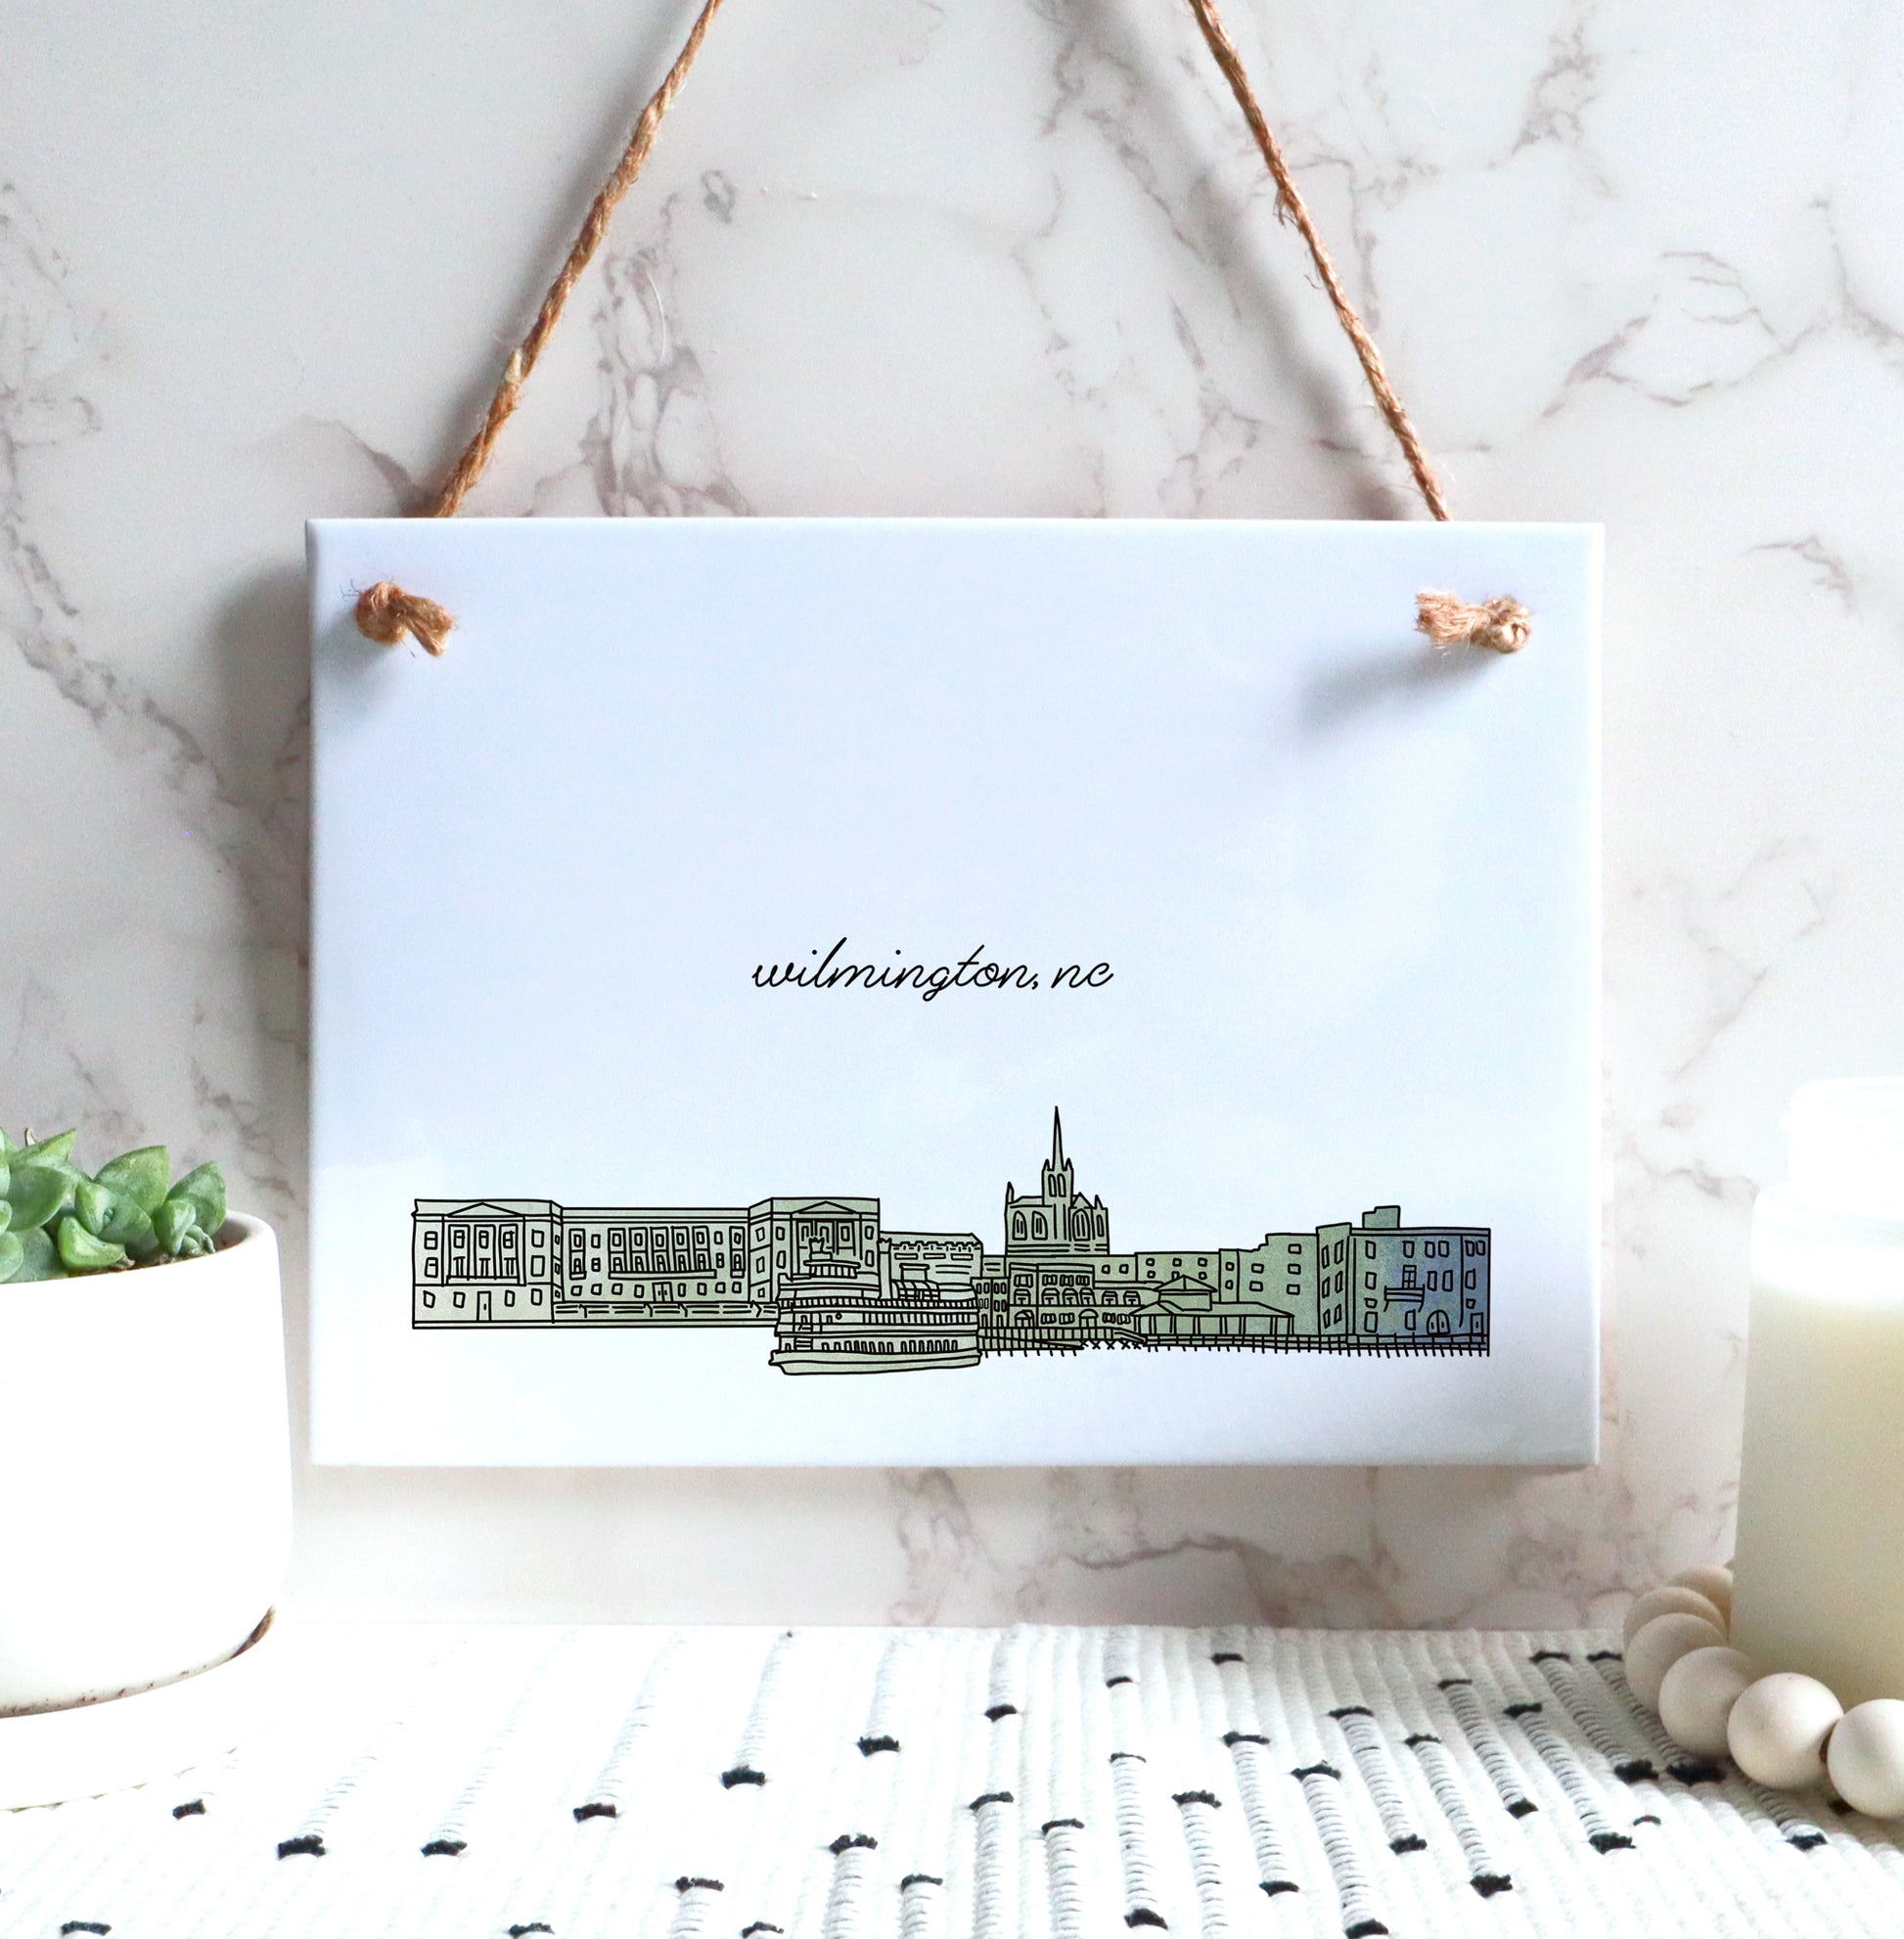 A Wilmington NC souvenir of a drawing of the city skyline on a rectangle tile sign, hanging on a wall - in the color green